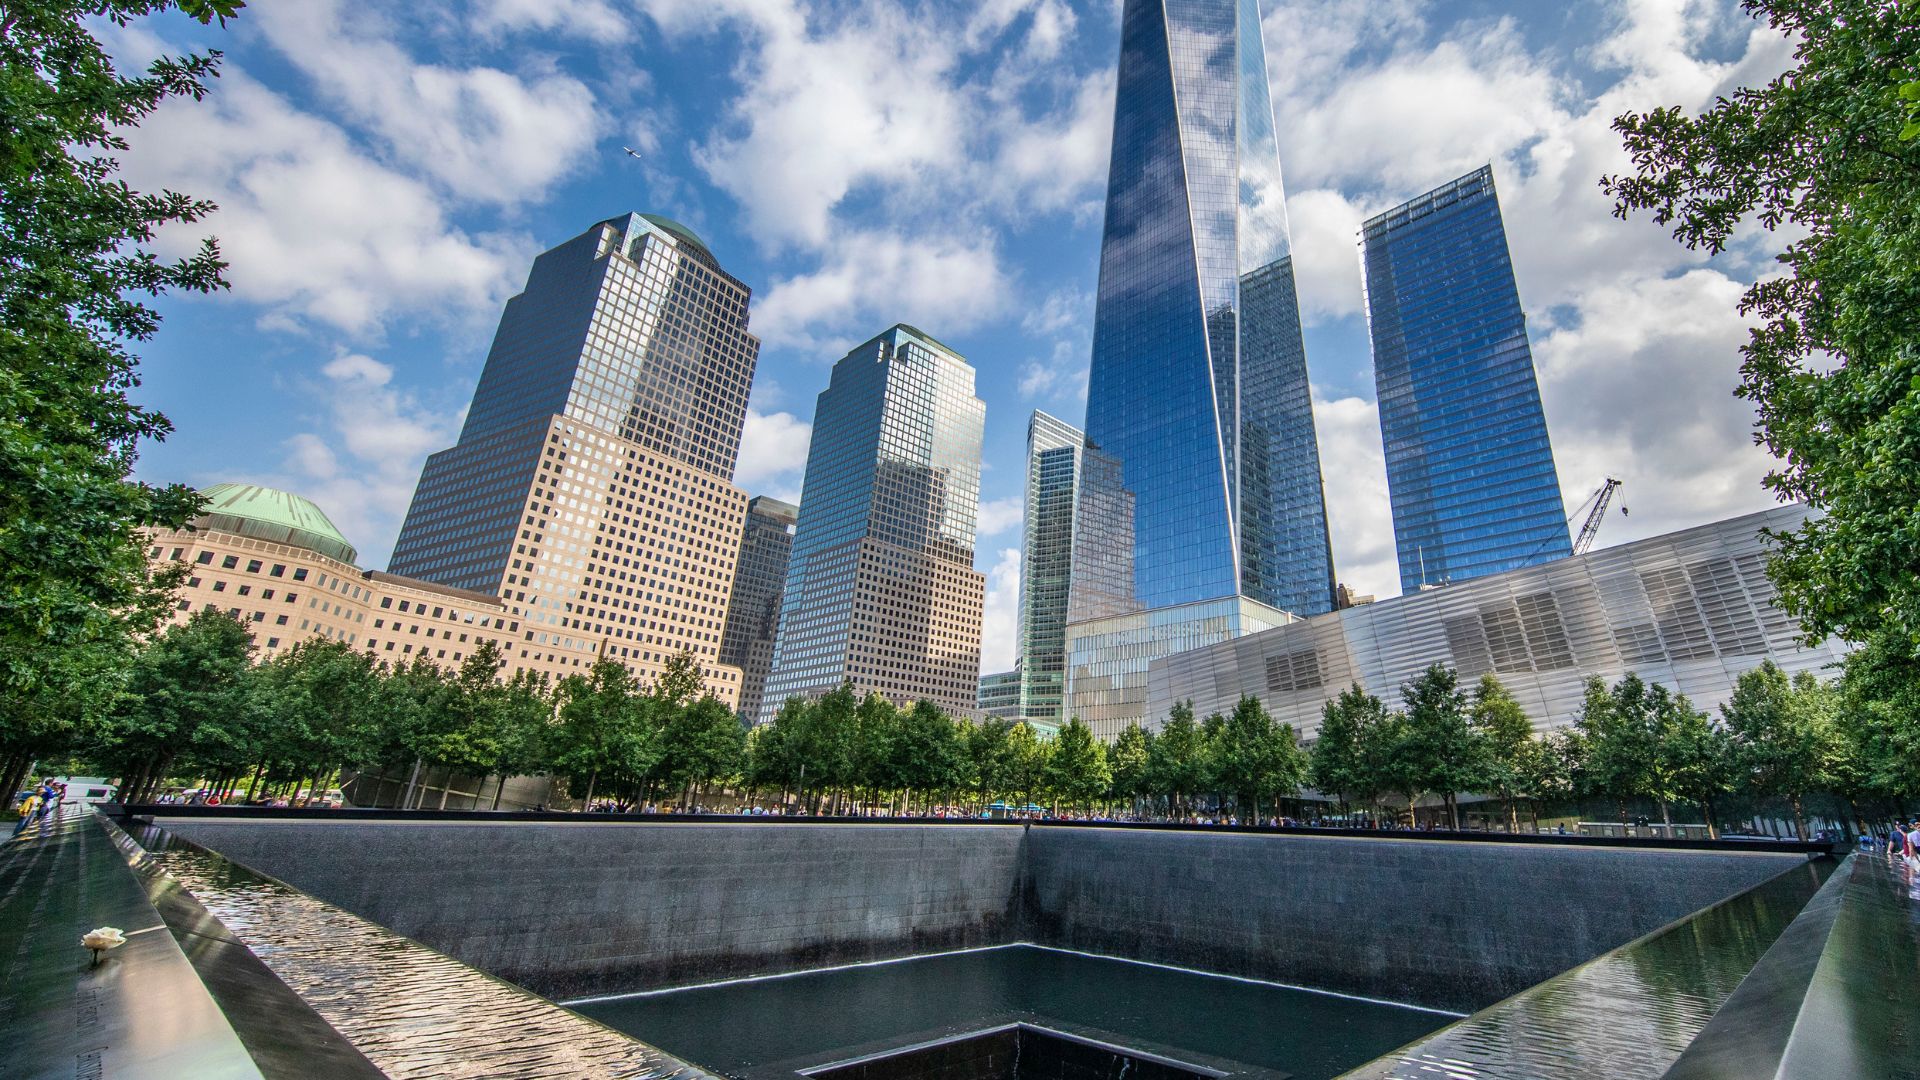 One of the Memorial reflecting pools and its parapets, surrounded by green trees and a portion of the skyline including One World Trade.